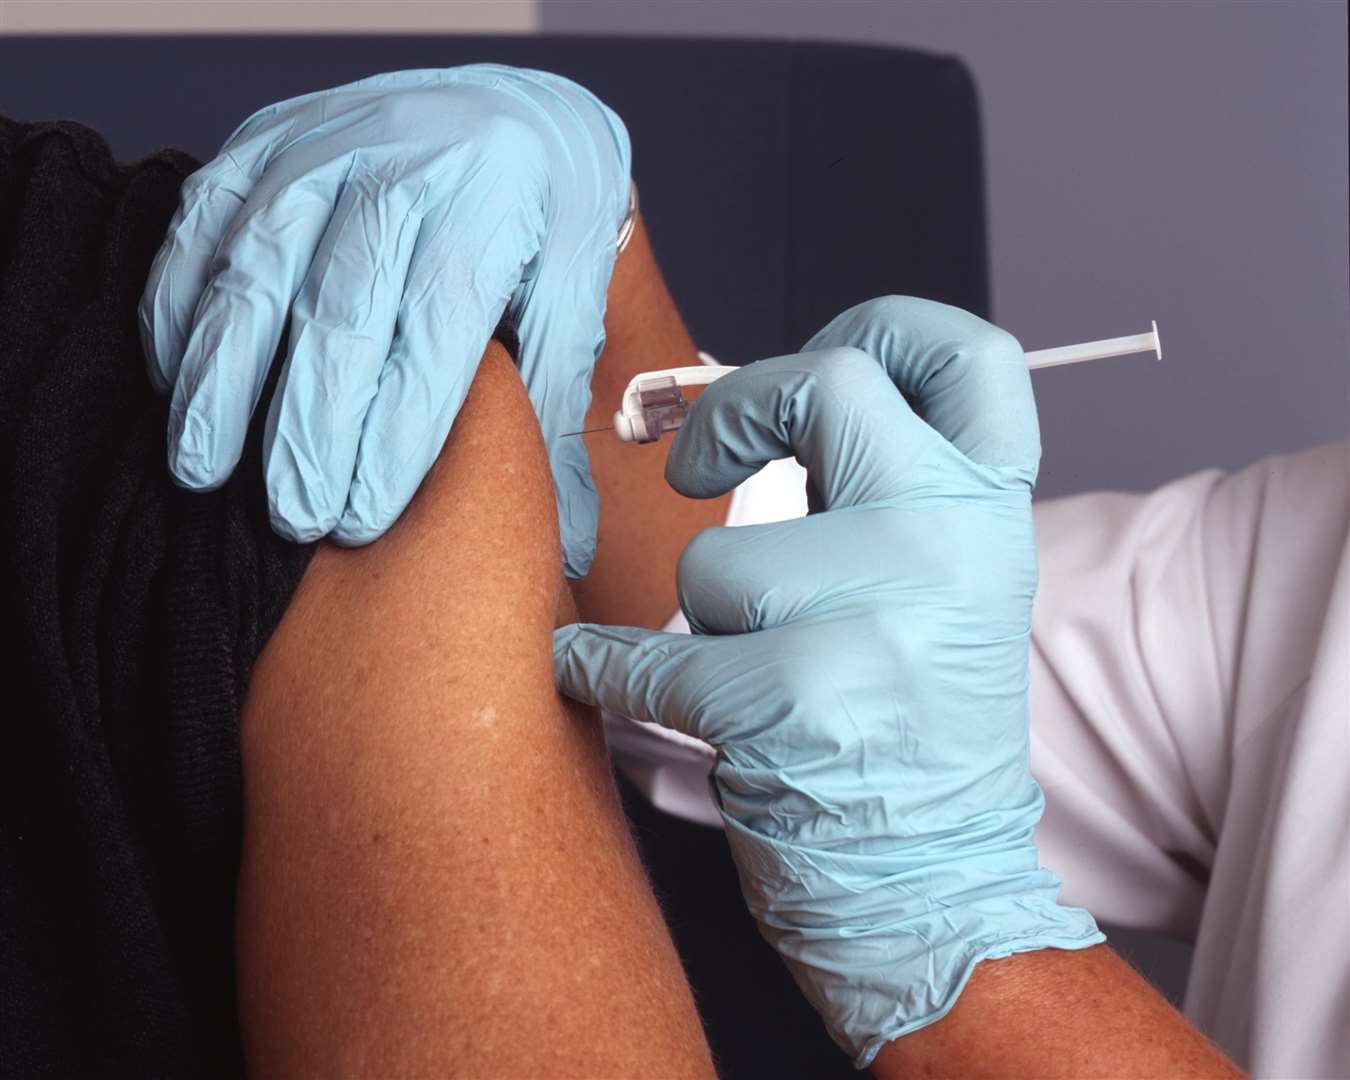 An error lead to teachers being offered the Covid-19 vaccine. Stock Image